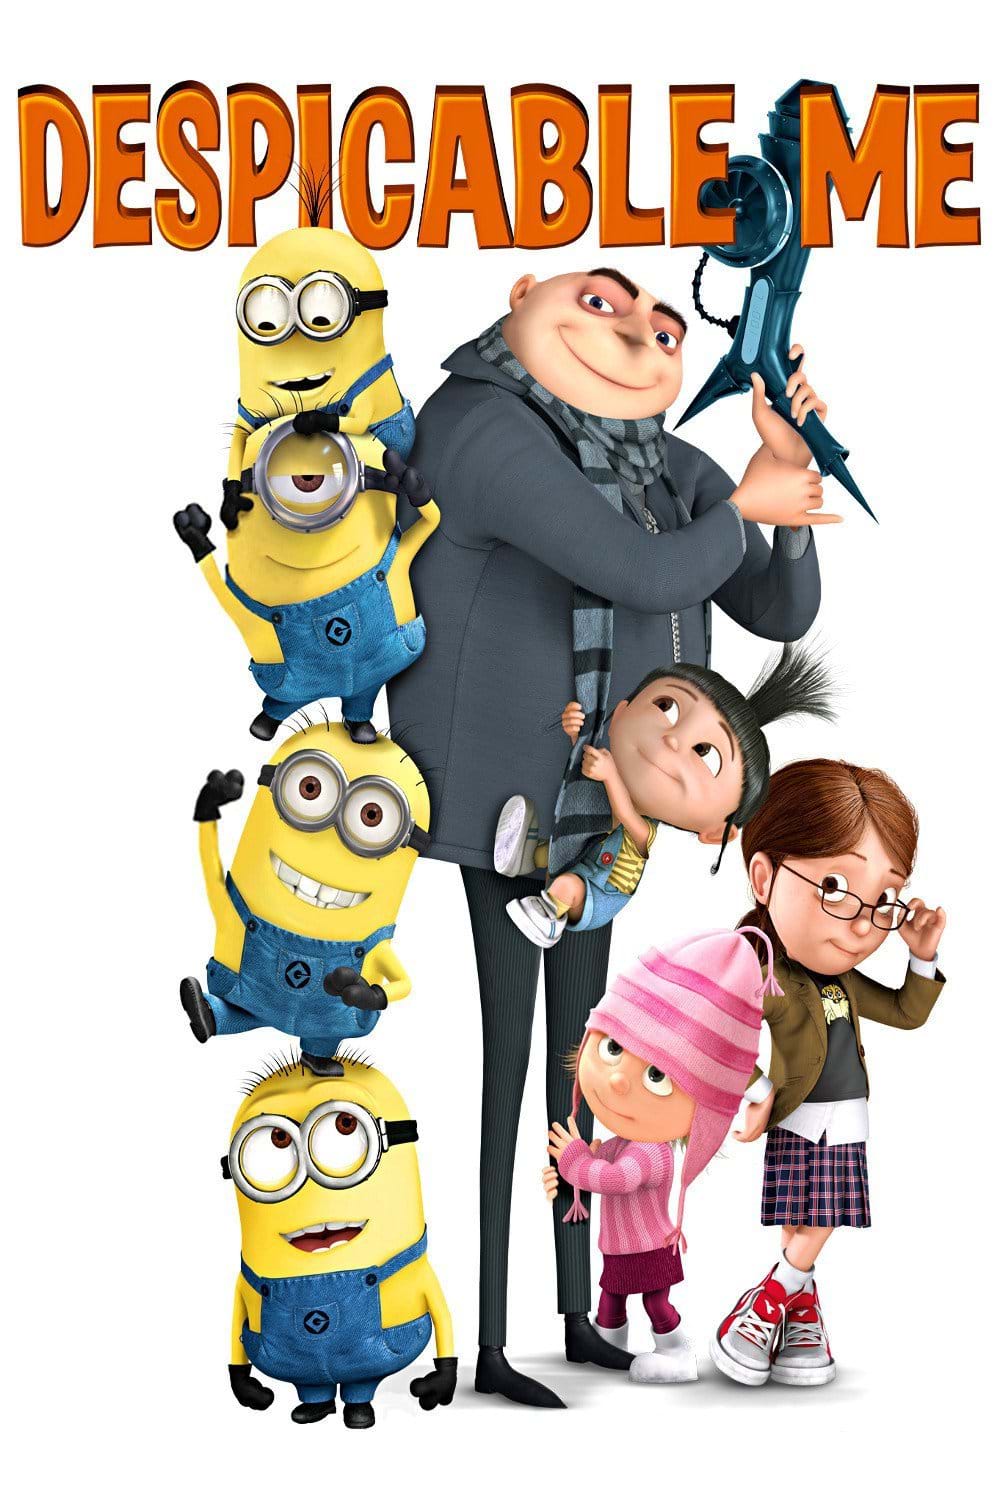 despicable me by darshali soni.jpg